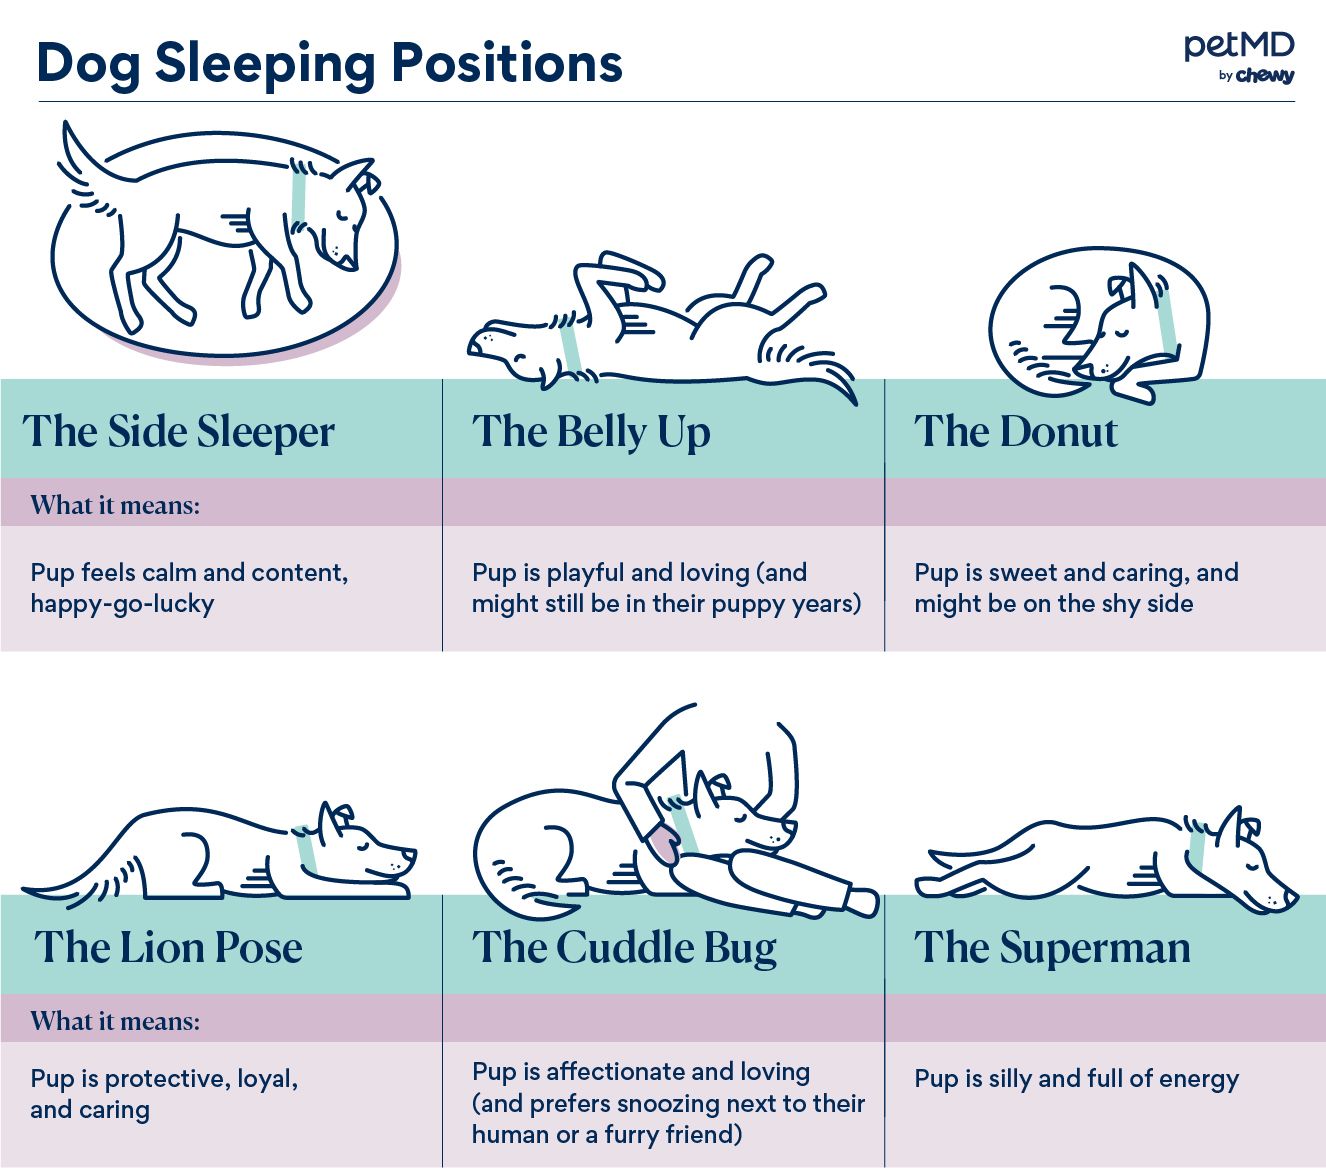 IV. How to Create a Comfortable Sleep Environment for Your Dog